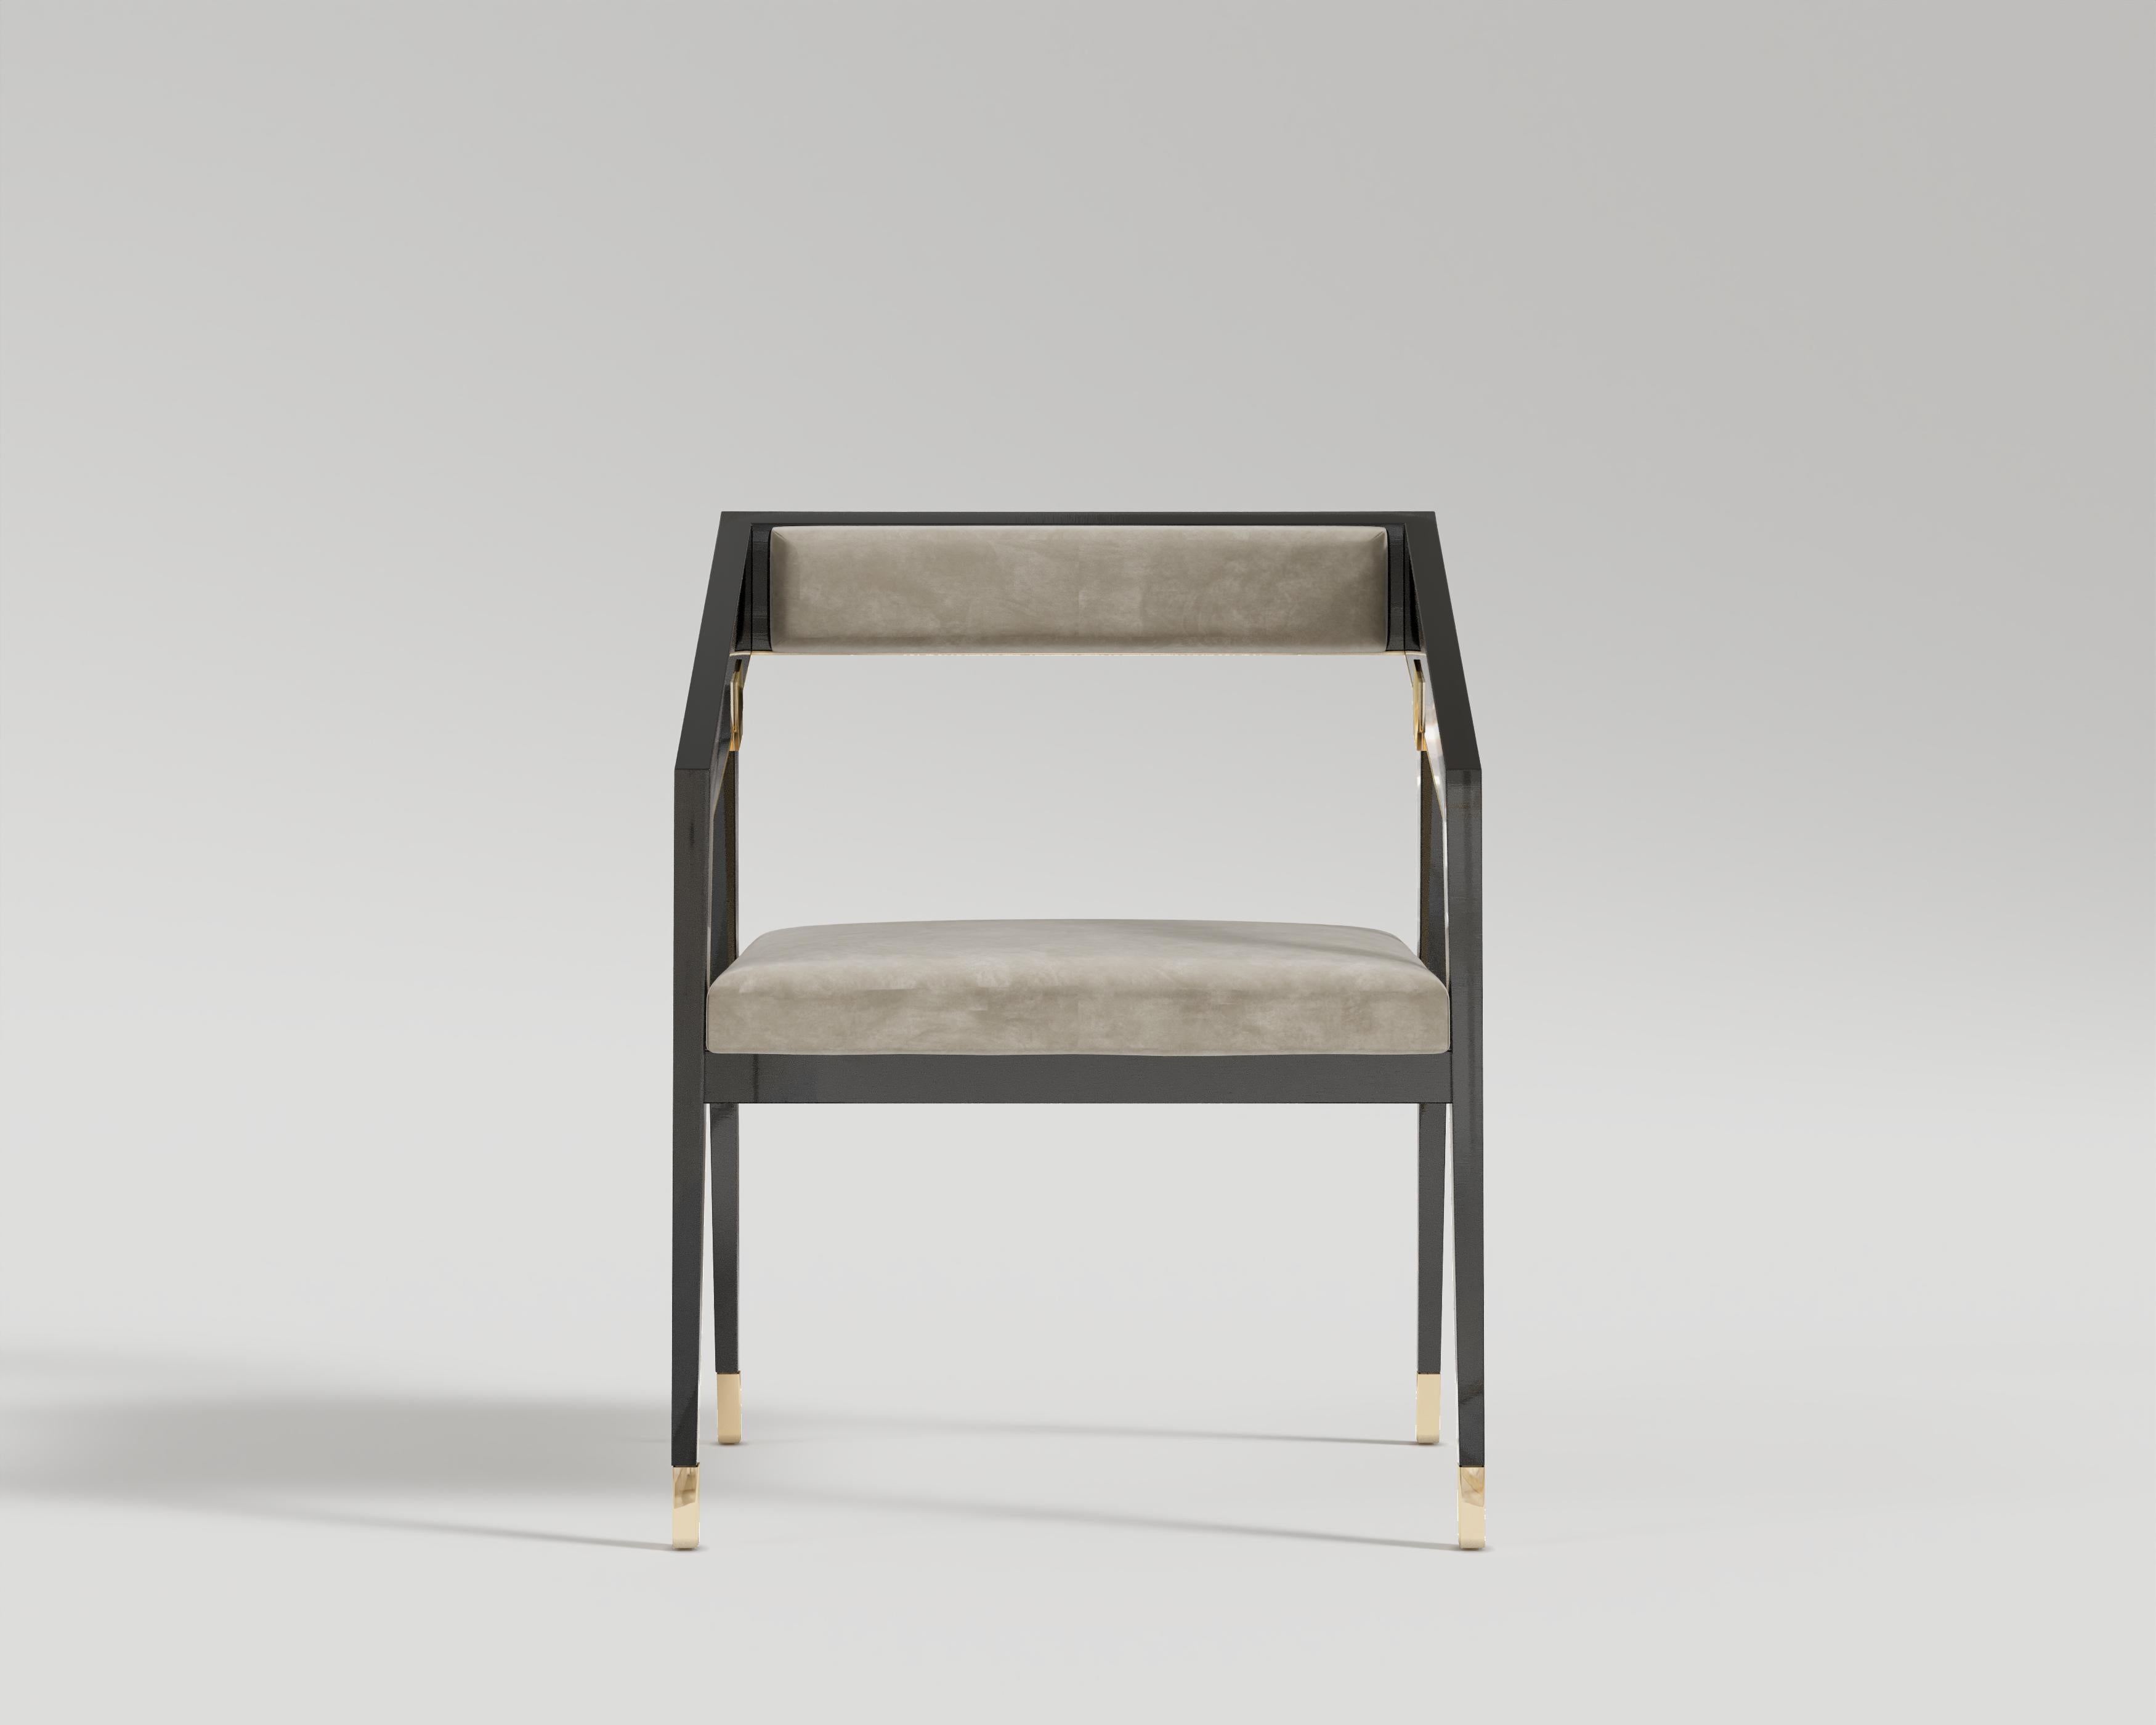 Parma Dining Chair
Discover the charm of Palena Furniture’s Parma Dining Chair, where classic Art Deco style meets modern luxury. The Parma Chair is more than just a place to sit; it is a statement piece of pure elegance for any room.

With a